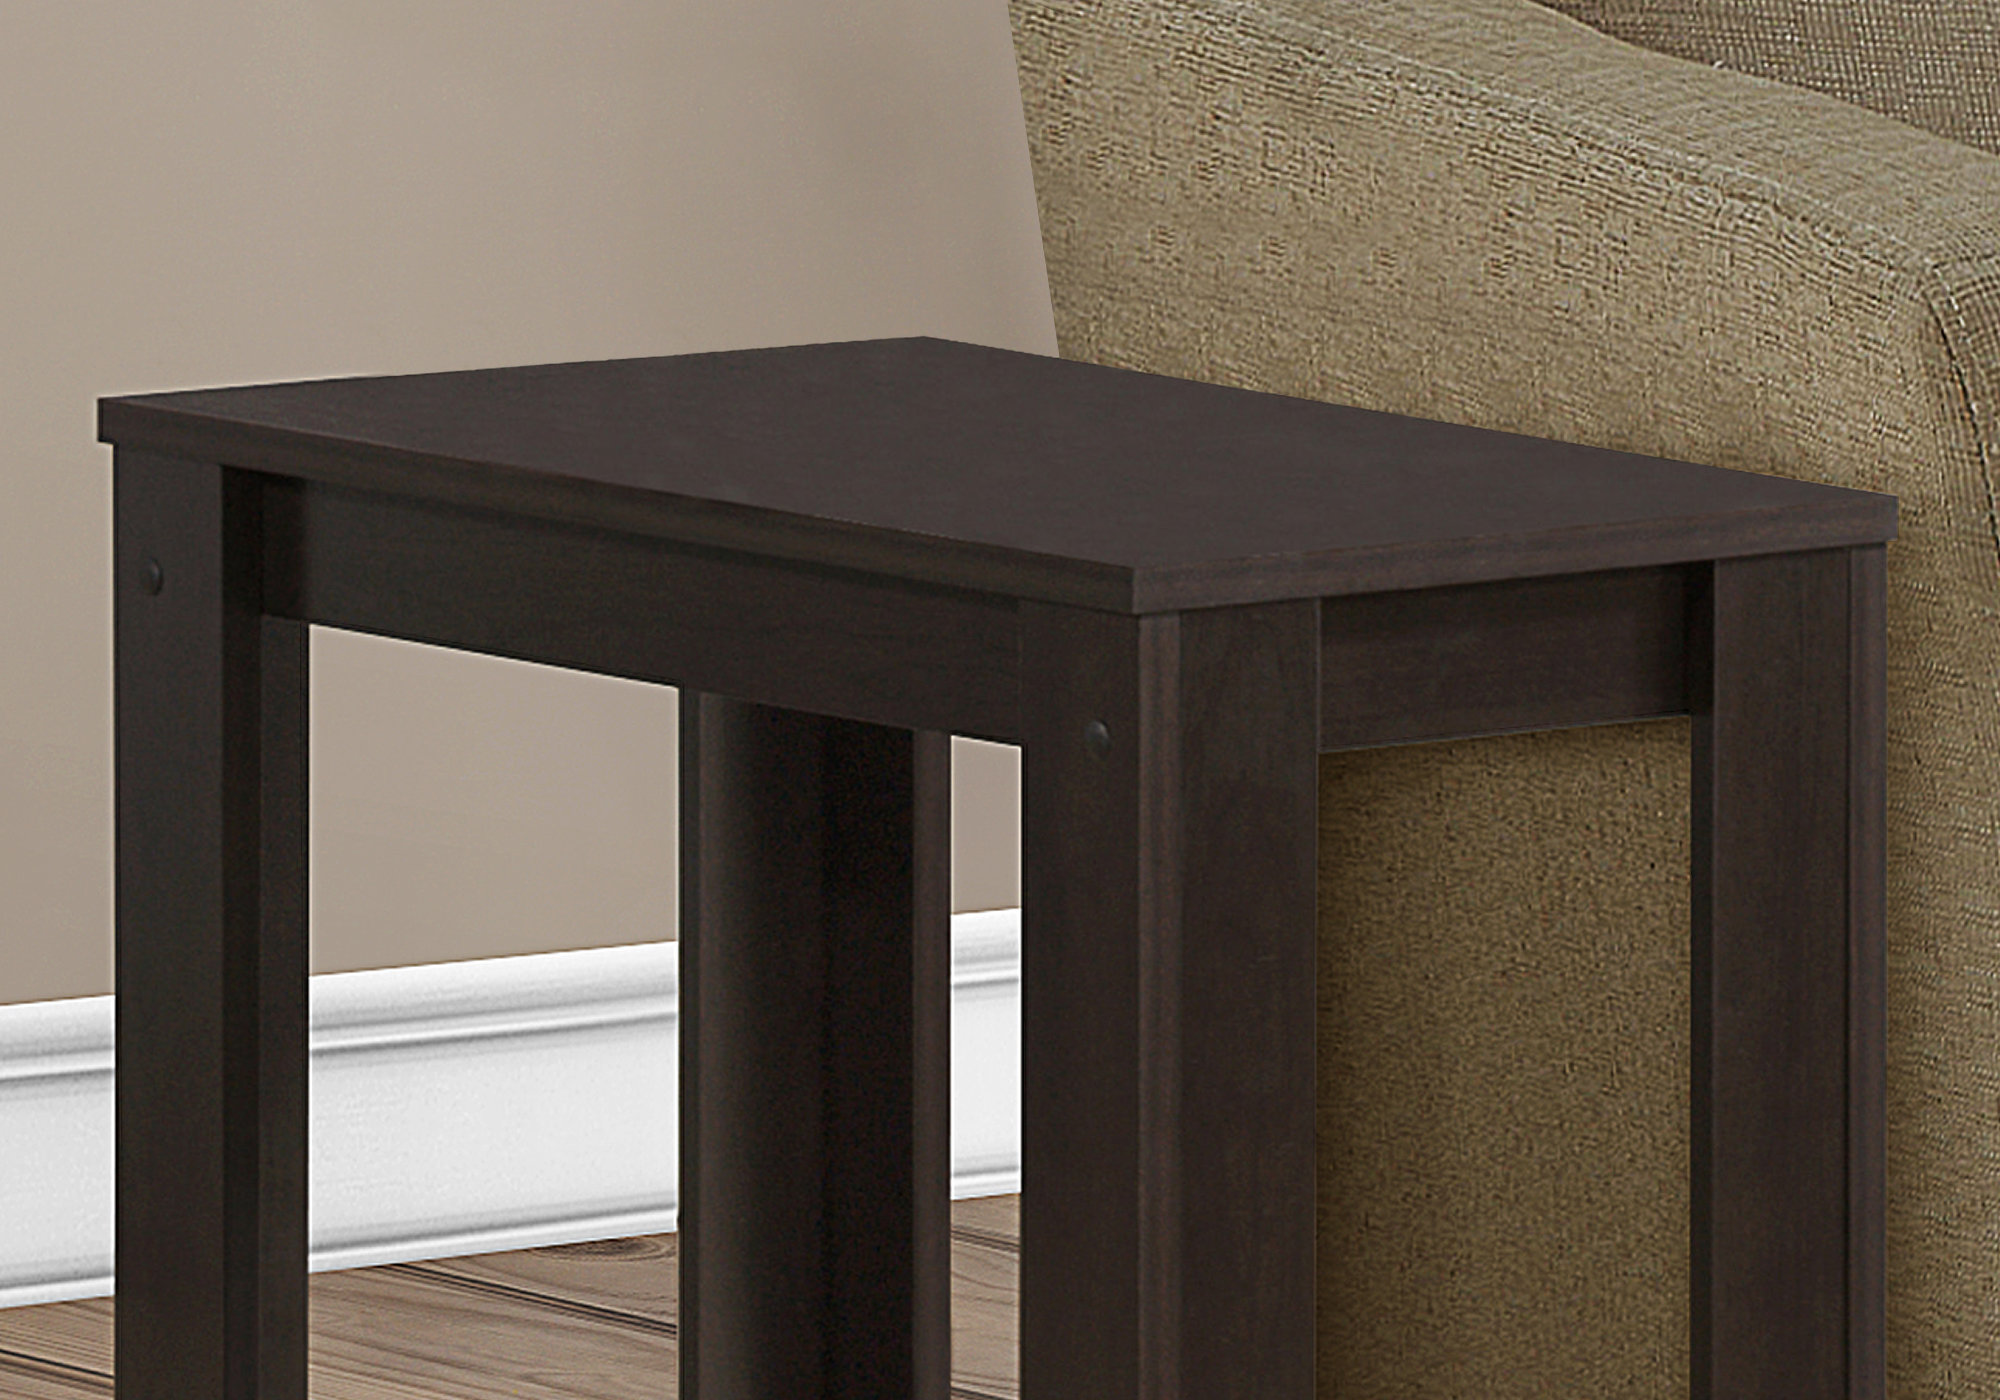 ACCENT TABLE - CAPPUCCINO